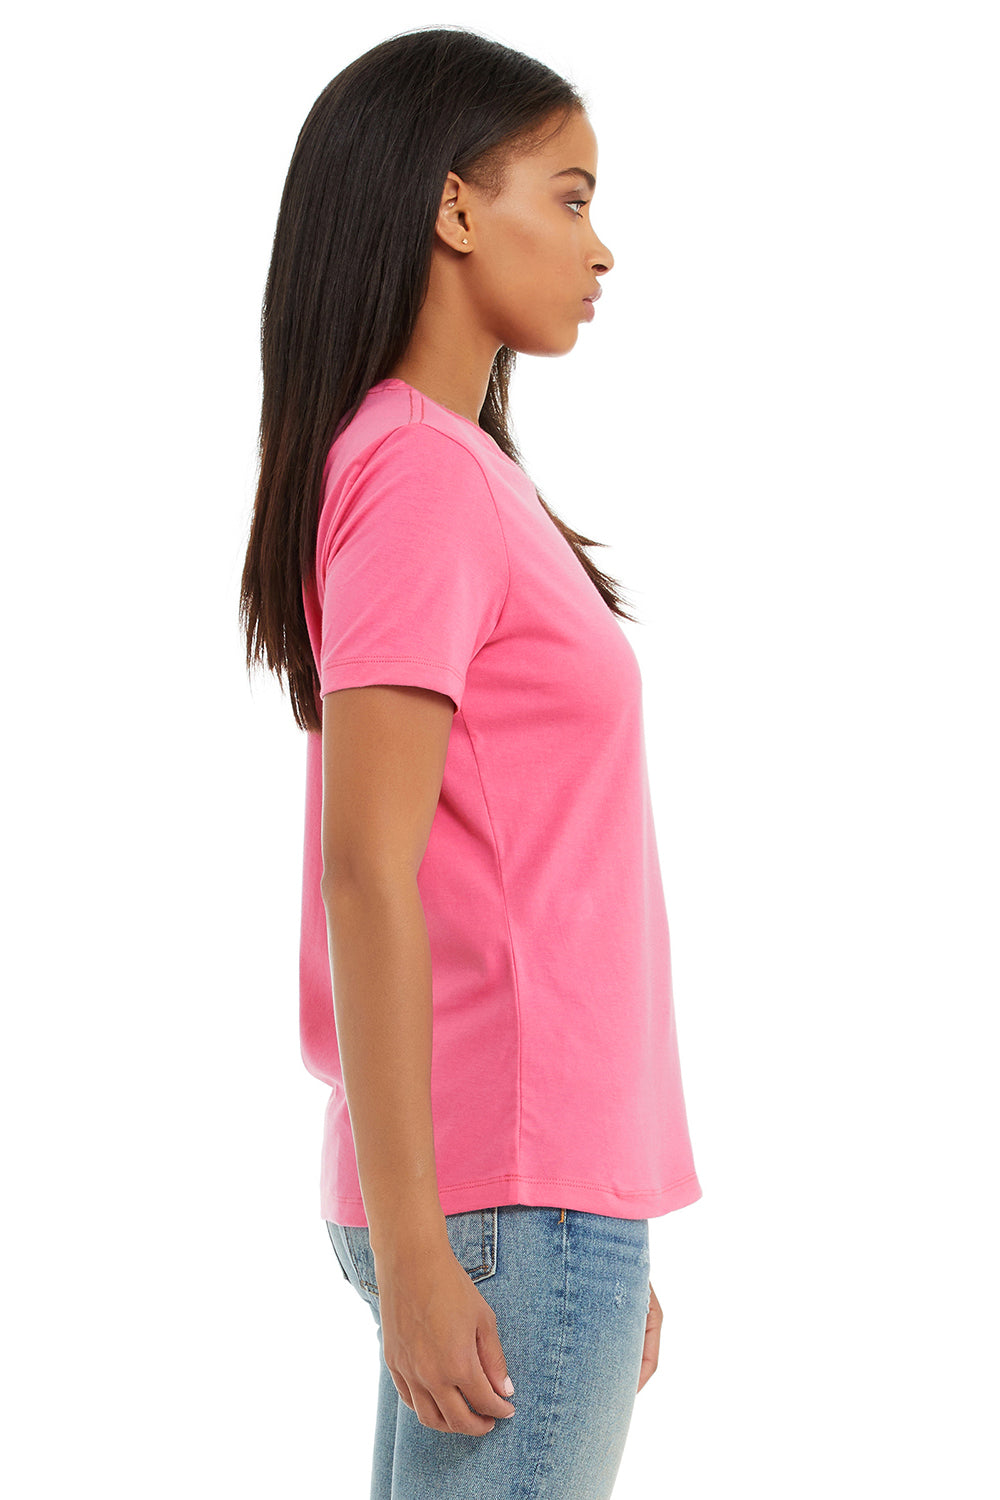 Bella + Canvas BC6400/B6400/6400 Womens Relaxed Jersey Short Sleeve Crewneck T-Shirt Charity Pink Model Side